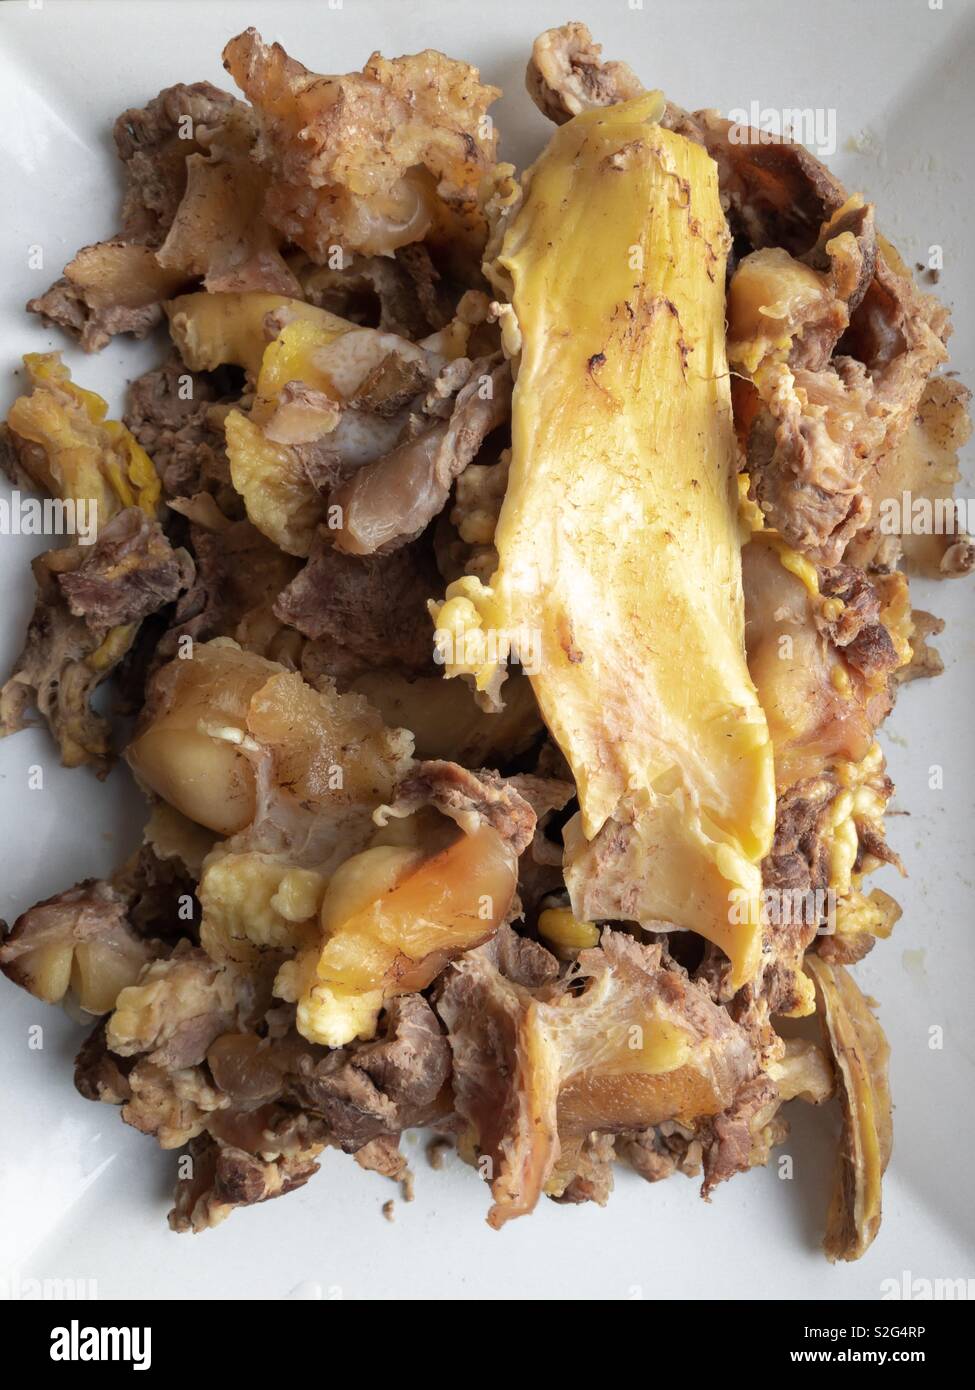 Top view on a rectangular plate full of cooked beef bones and tendons as canine food Stock Photo